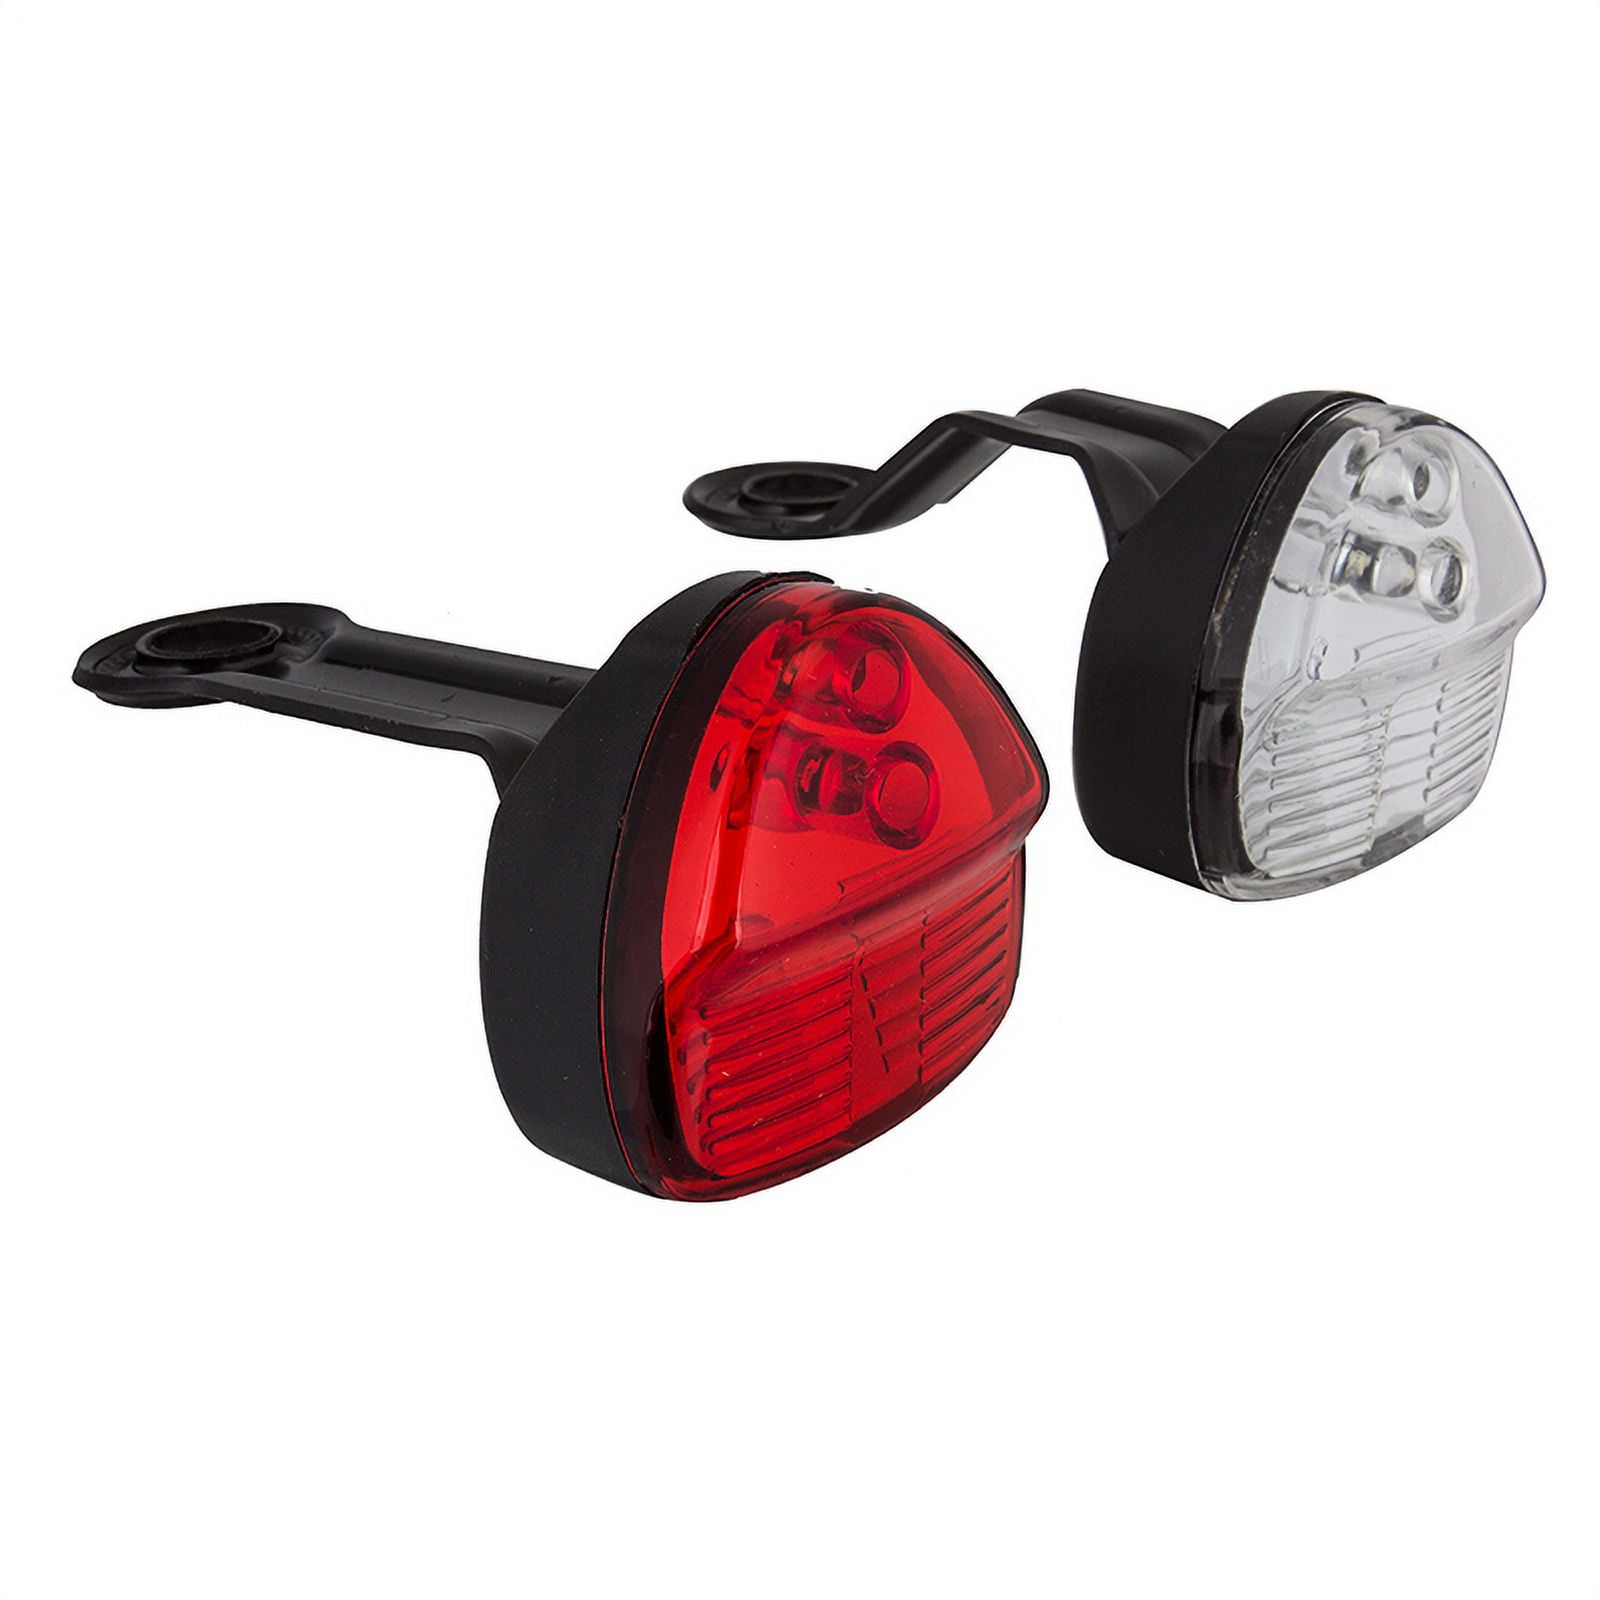 Reelight SL120 Flashing Compact Bicycle LED Headlight and Tail